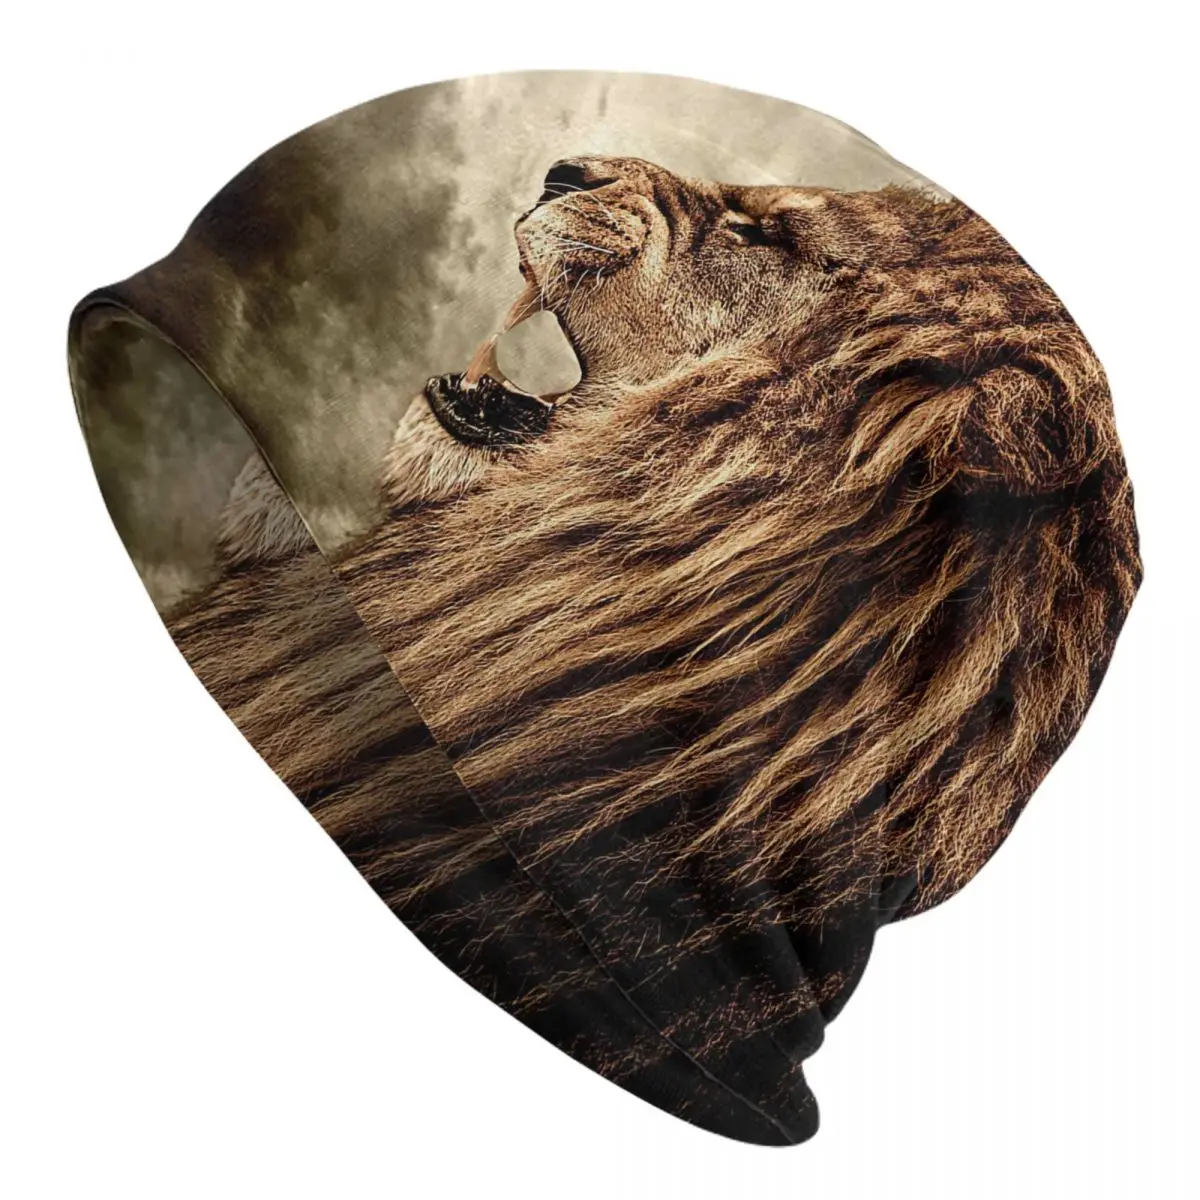 Roaring Lion Against Stormy Skies Adult Men's Women's Knit Hat Keep warm winter Funny knitted hat